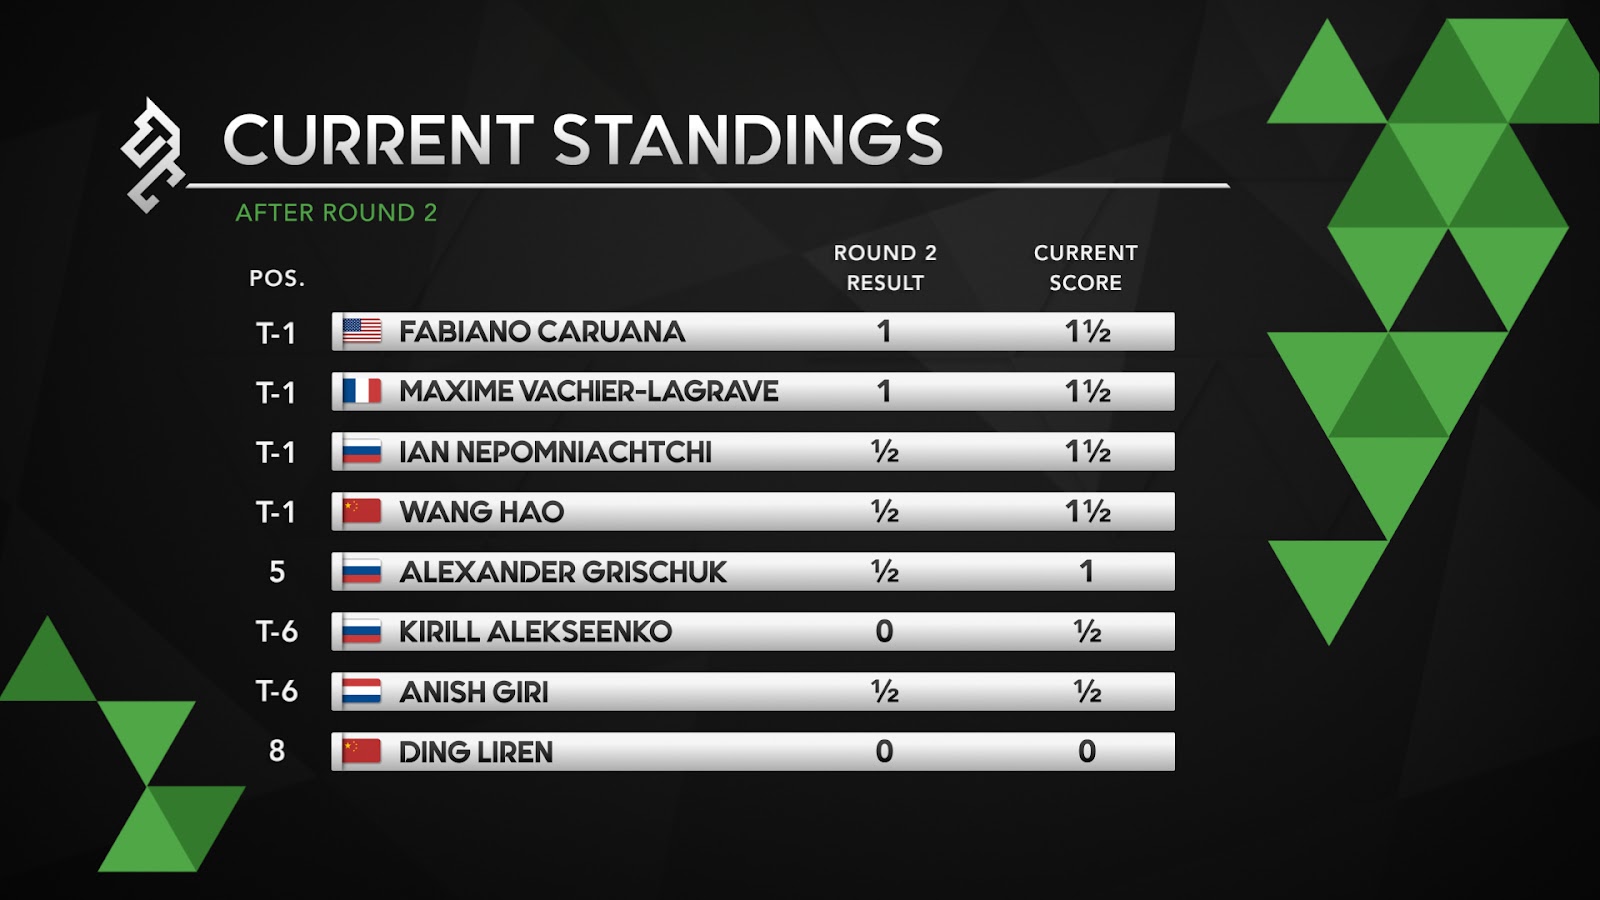 Caruana joins a five way tie for the lead after three rounds of